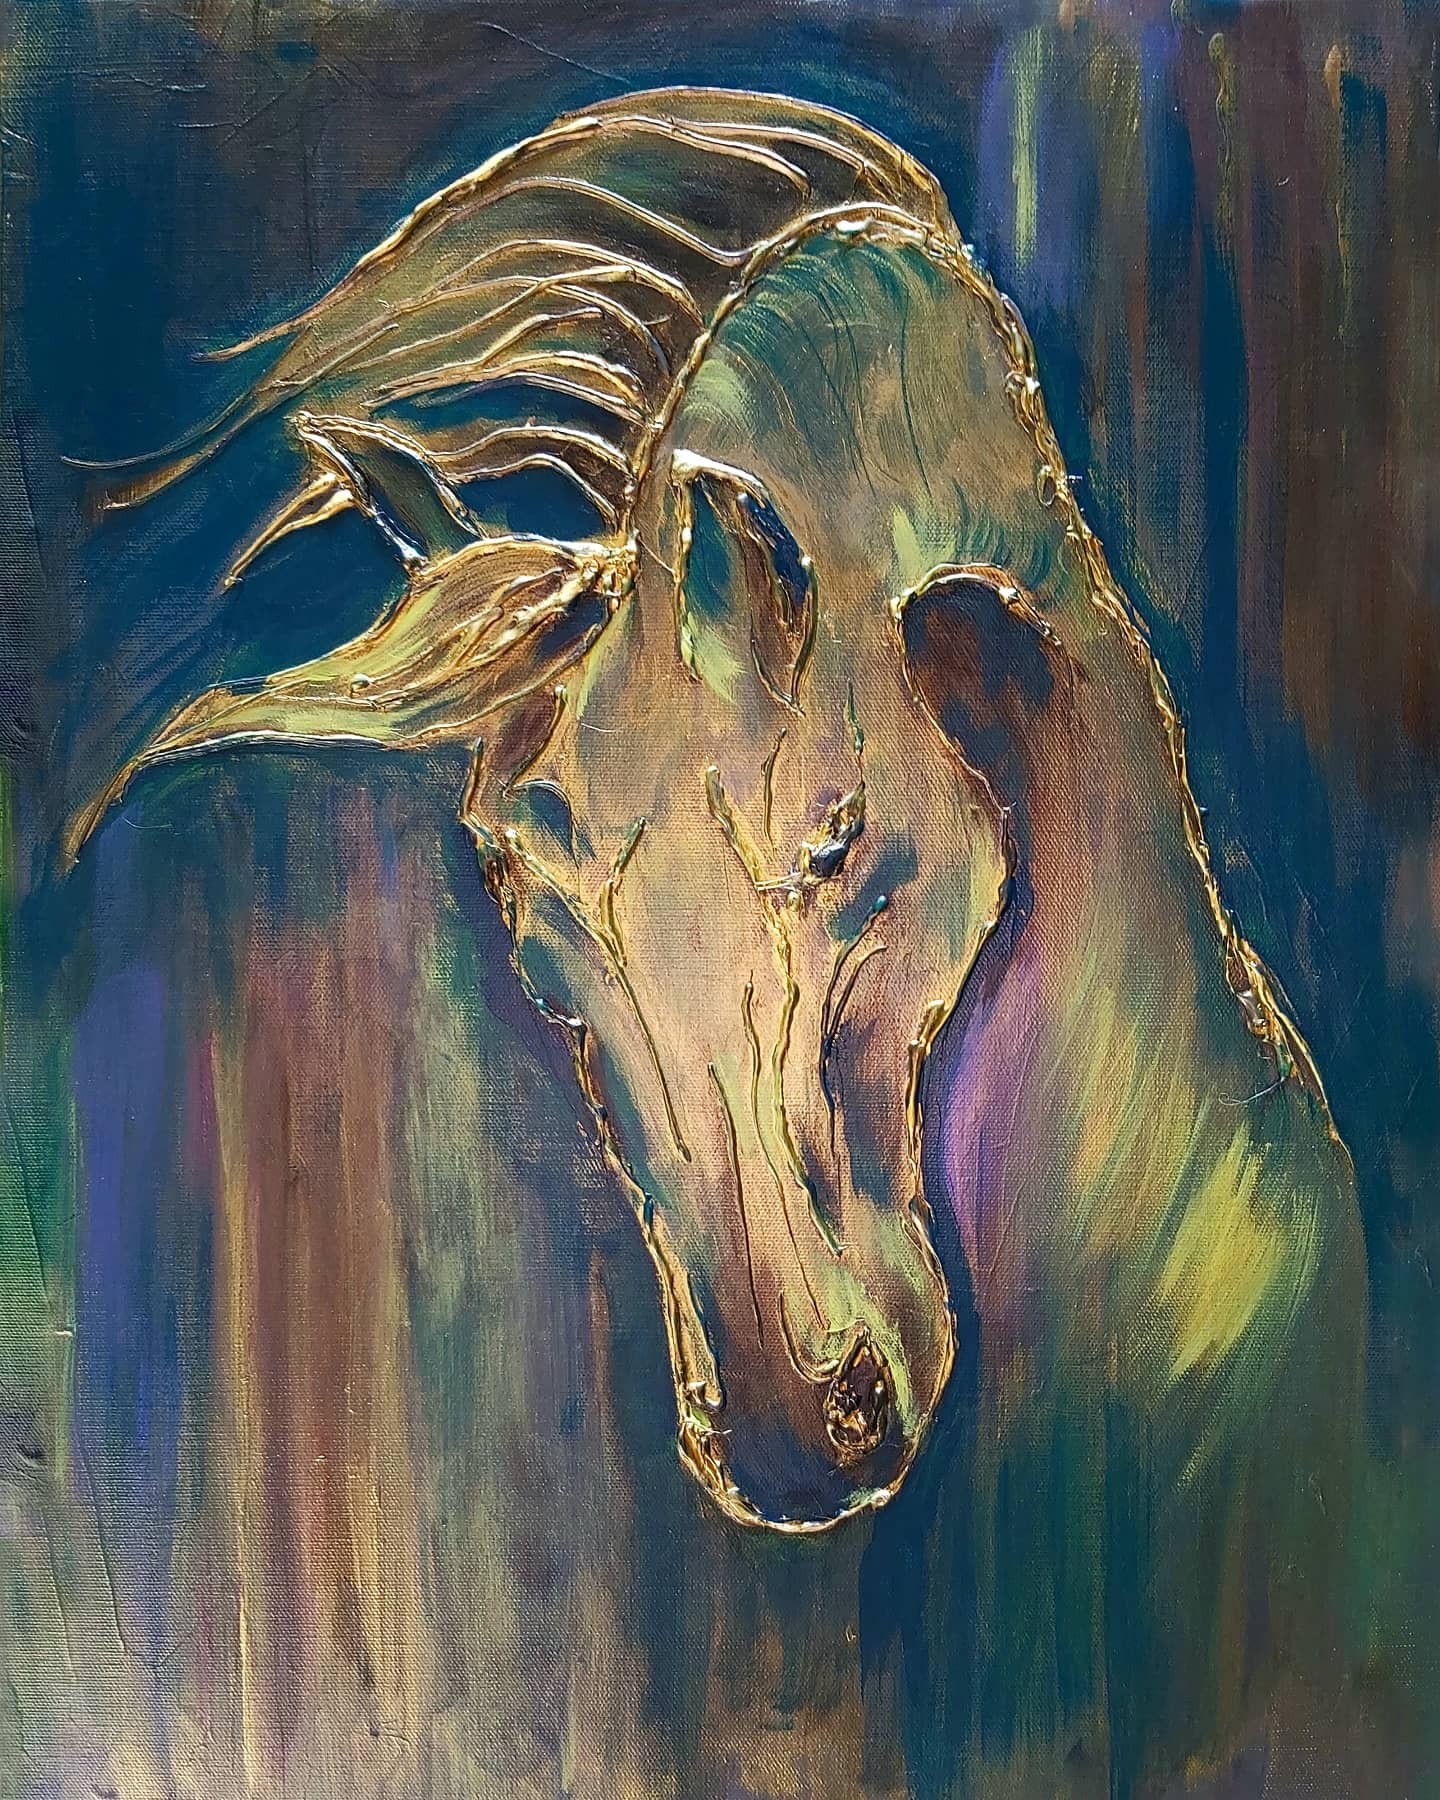 Golden Horse 2 by J A S S Perera